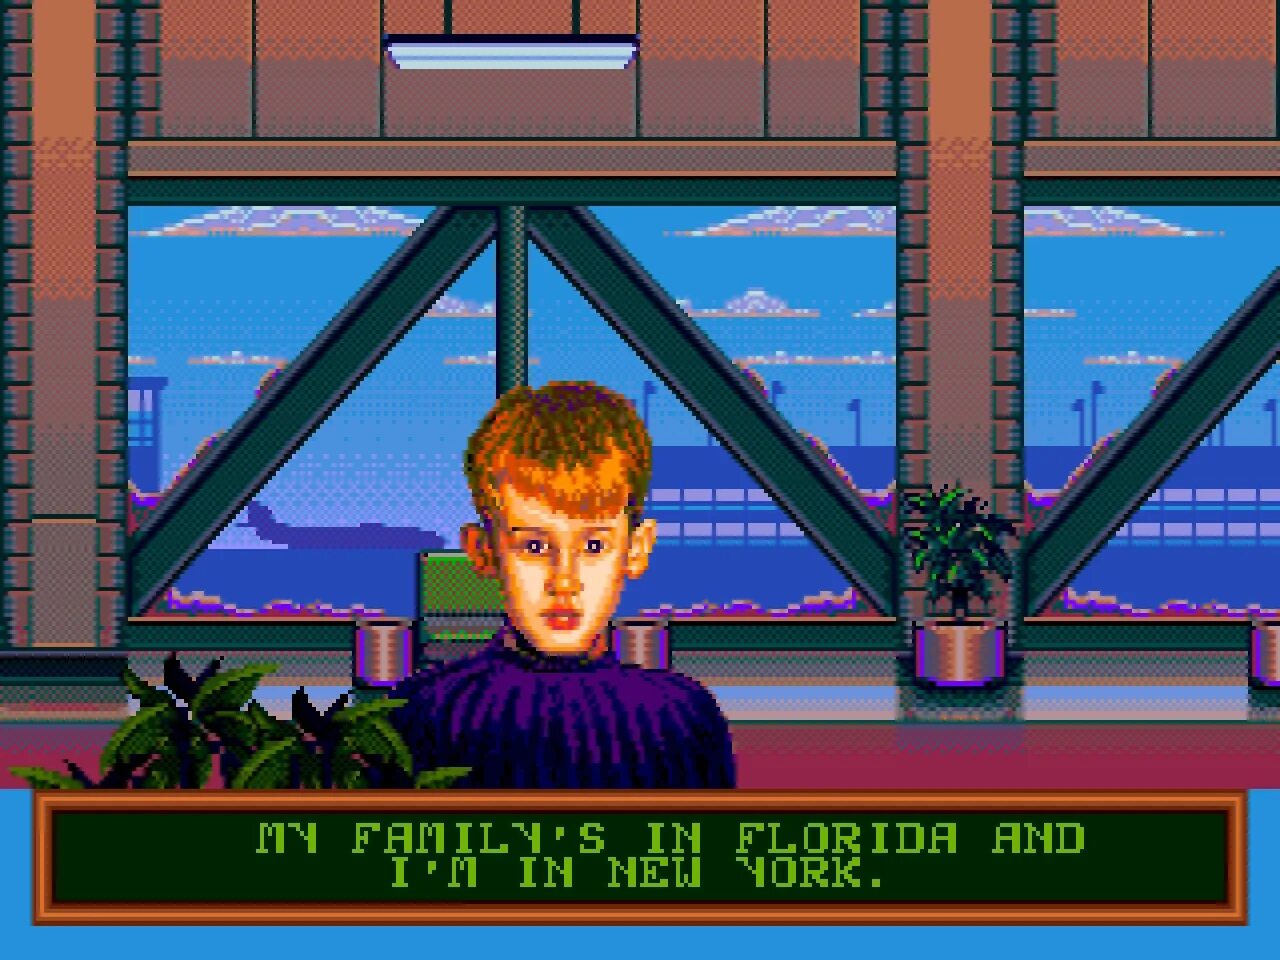 The home 2 games. Home Alone 2 Lost in New York Sega. Home Alone 2: Lost in New York (игра). Home Alone 1 игра. Home Alone игра Sega.